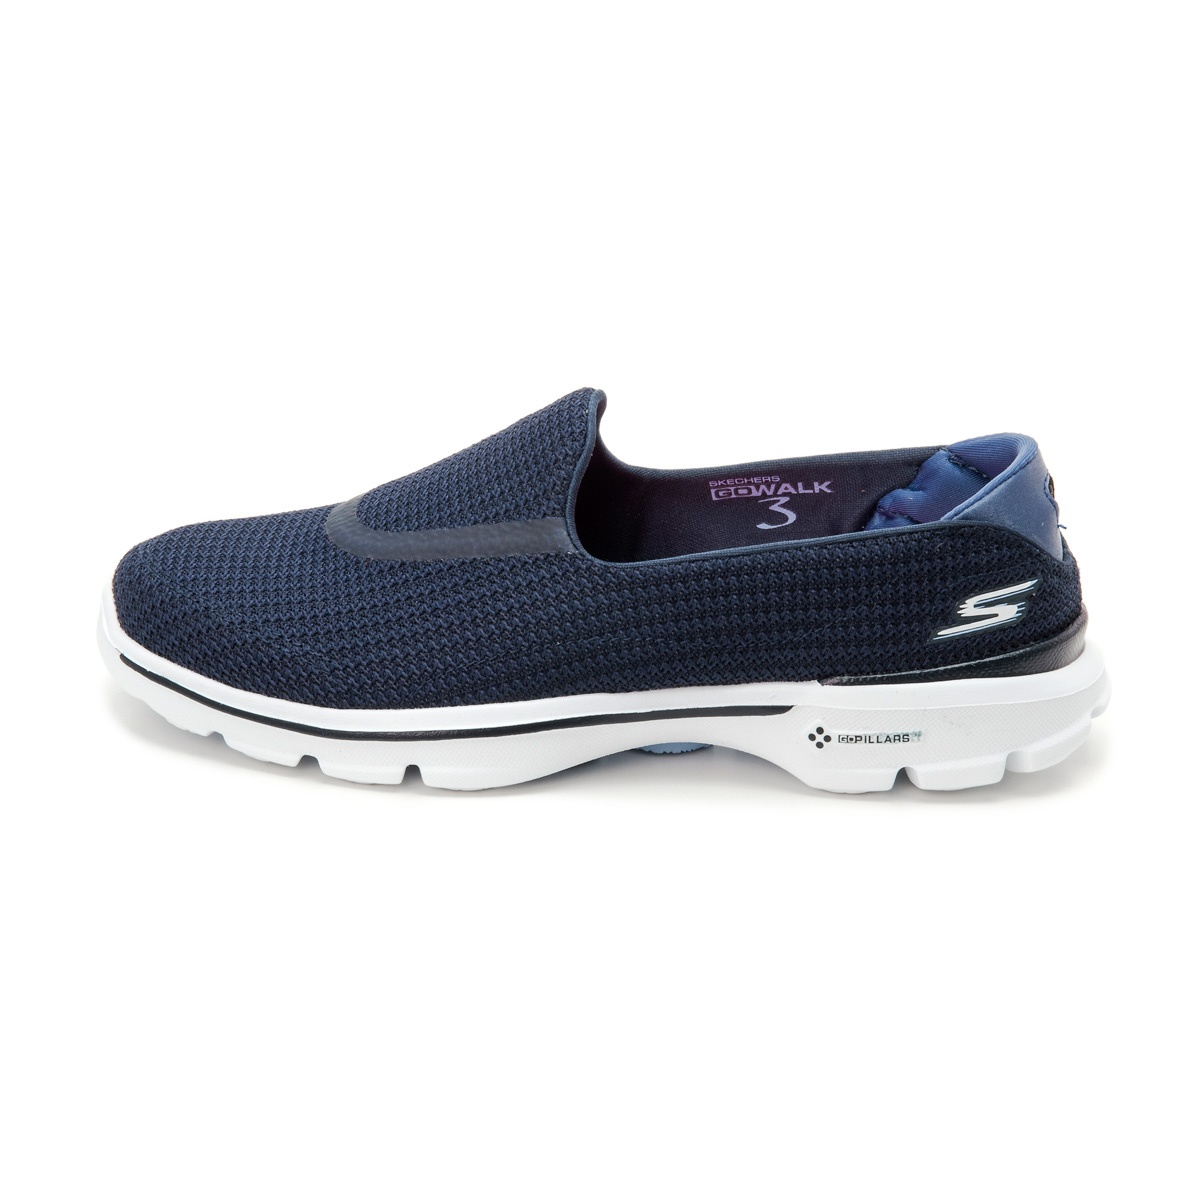 qvc skechers today